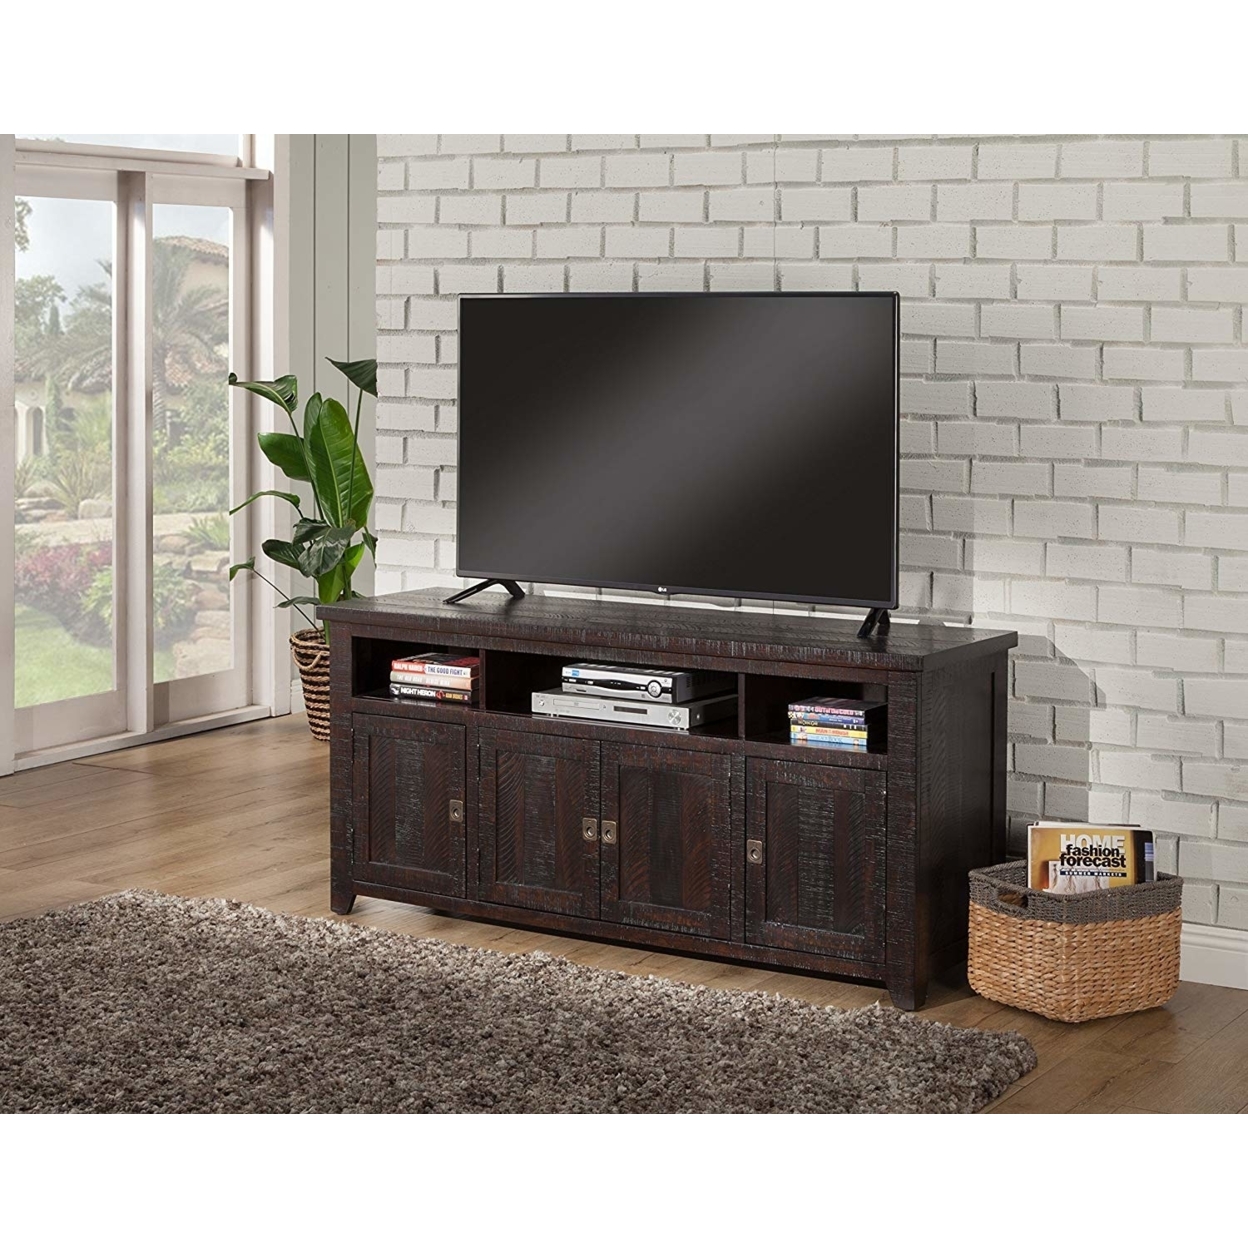 Wooden TV Stand With 3 Shelves And Cabinets, Espresso Brown- Saltoro Sherpi